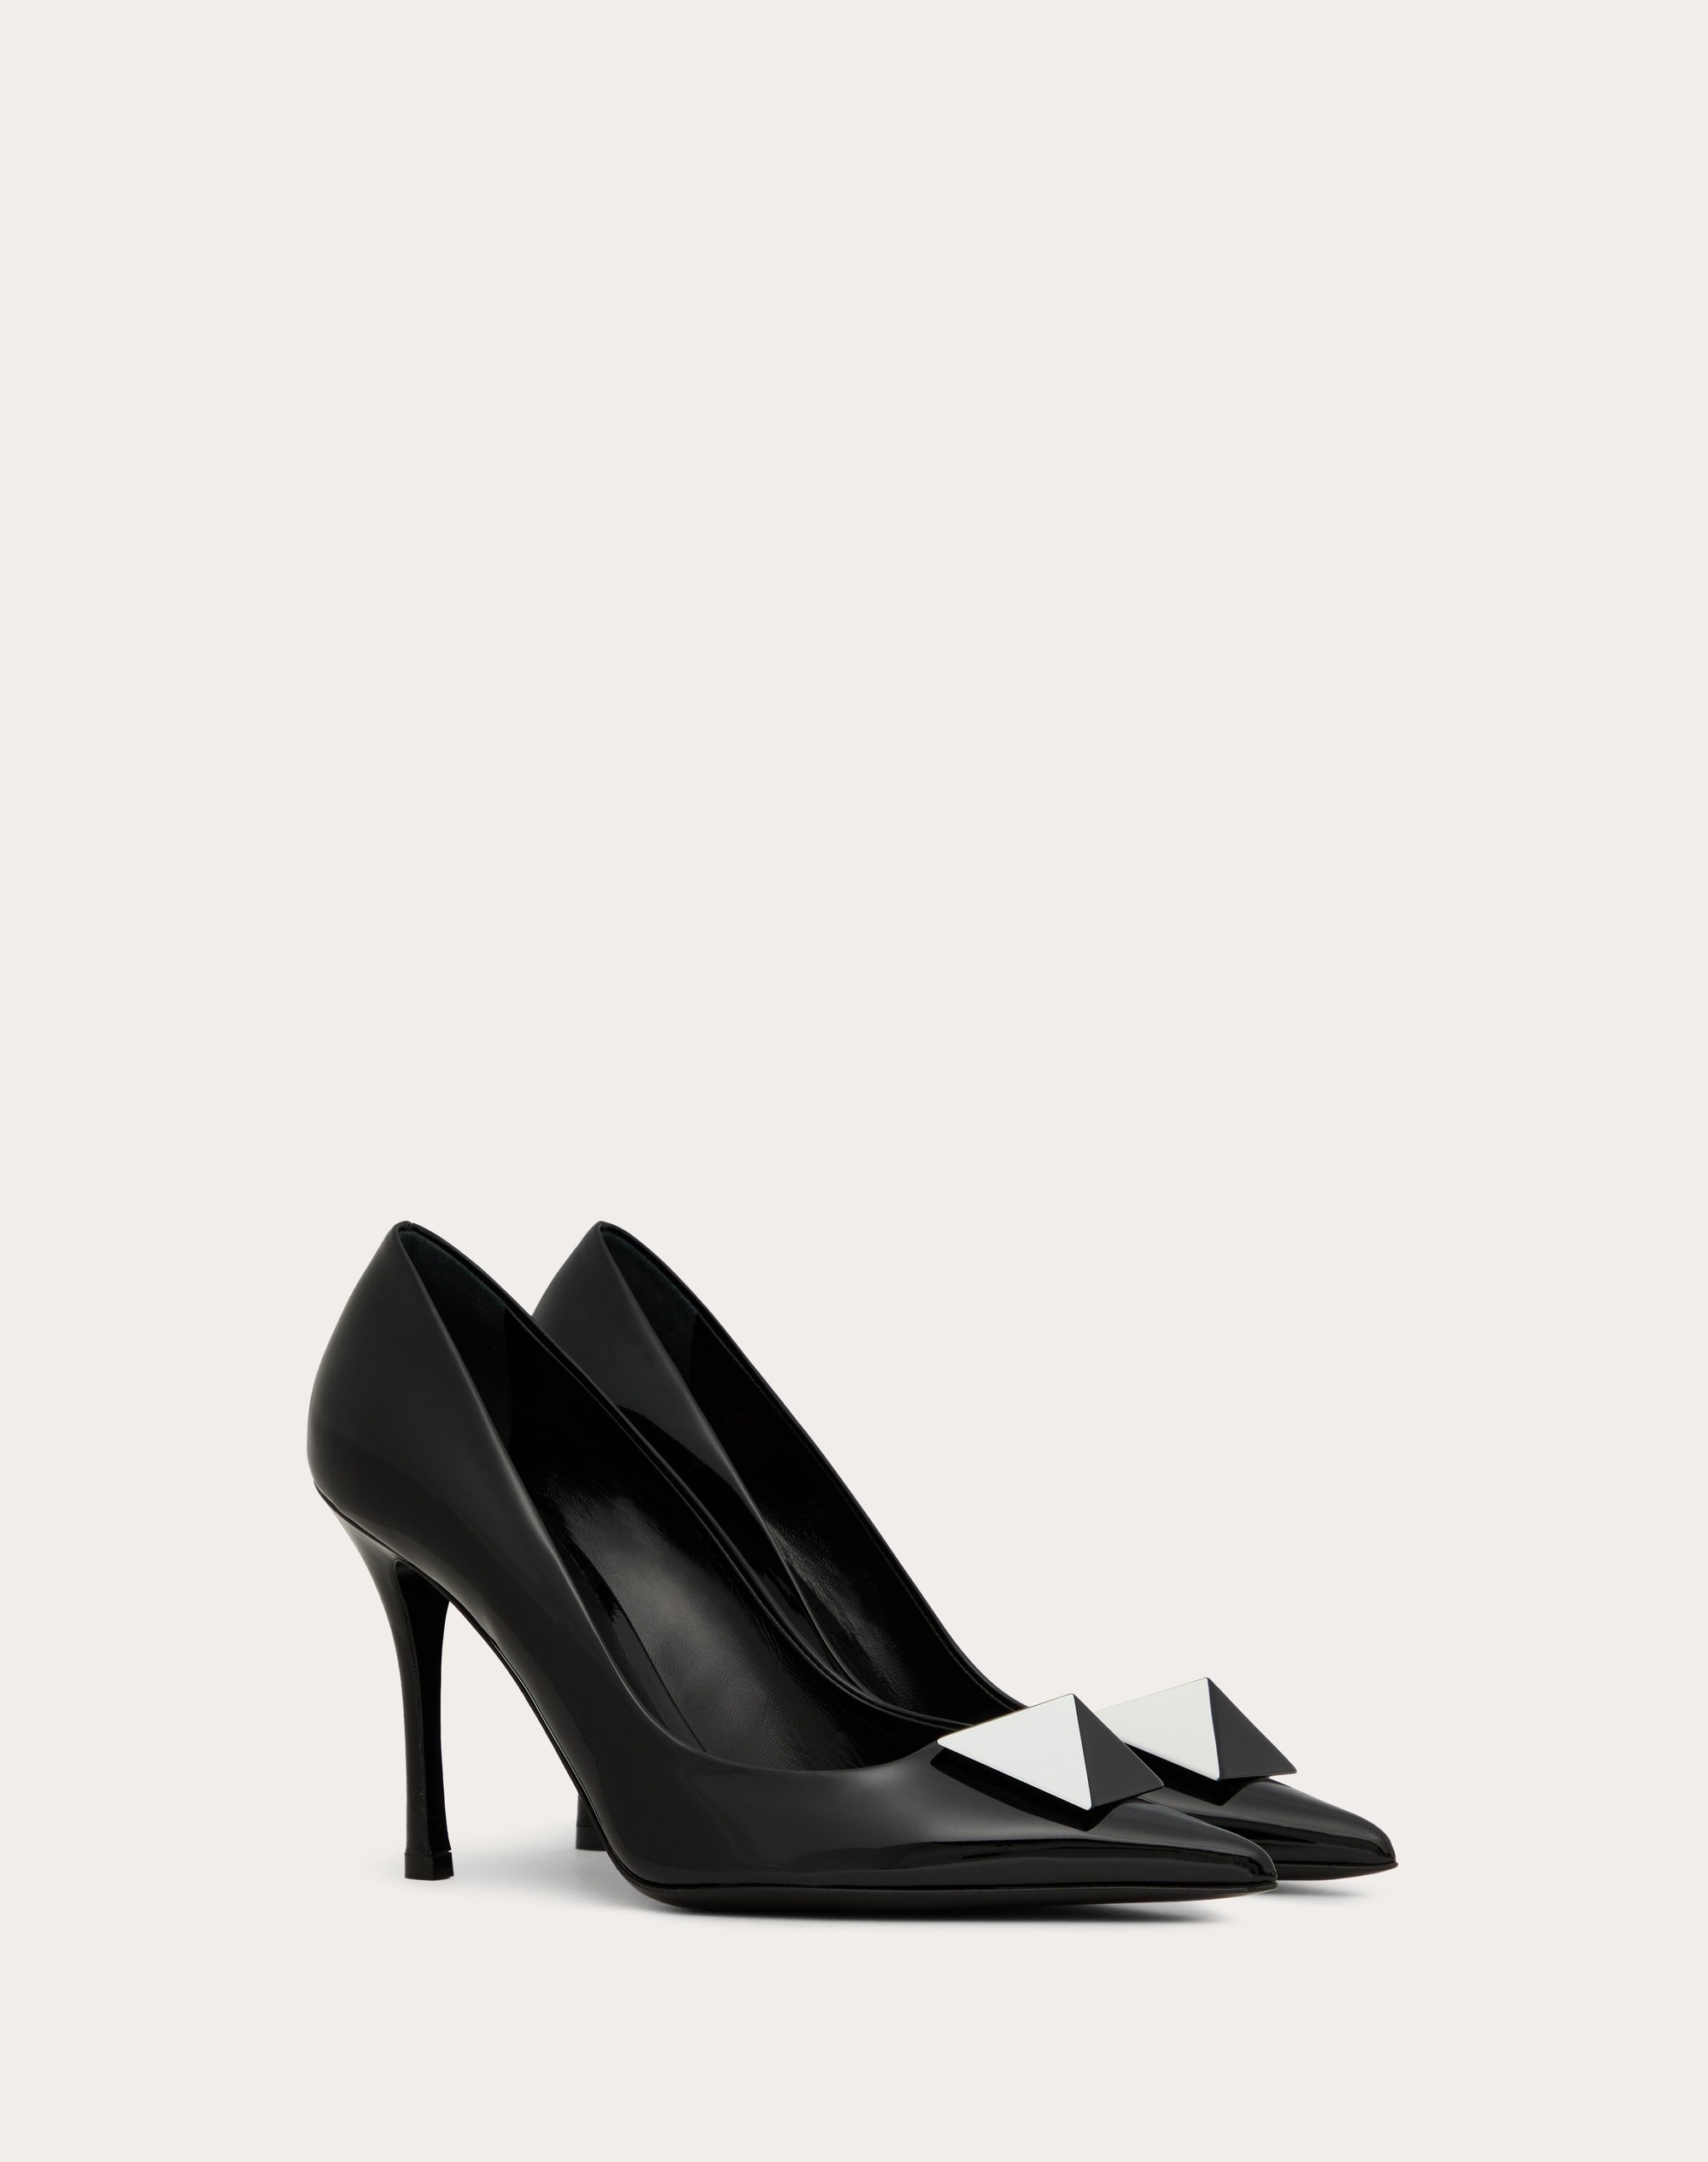 ONE STUD PATENT LEATHER PUMP AND TWO-TONE STUD 100MM - 2